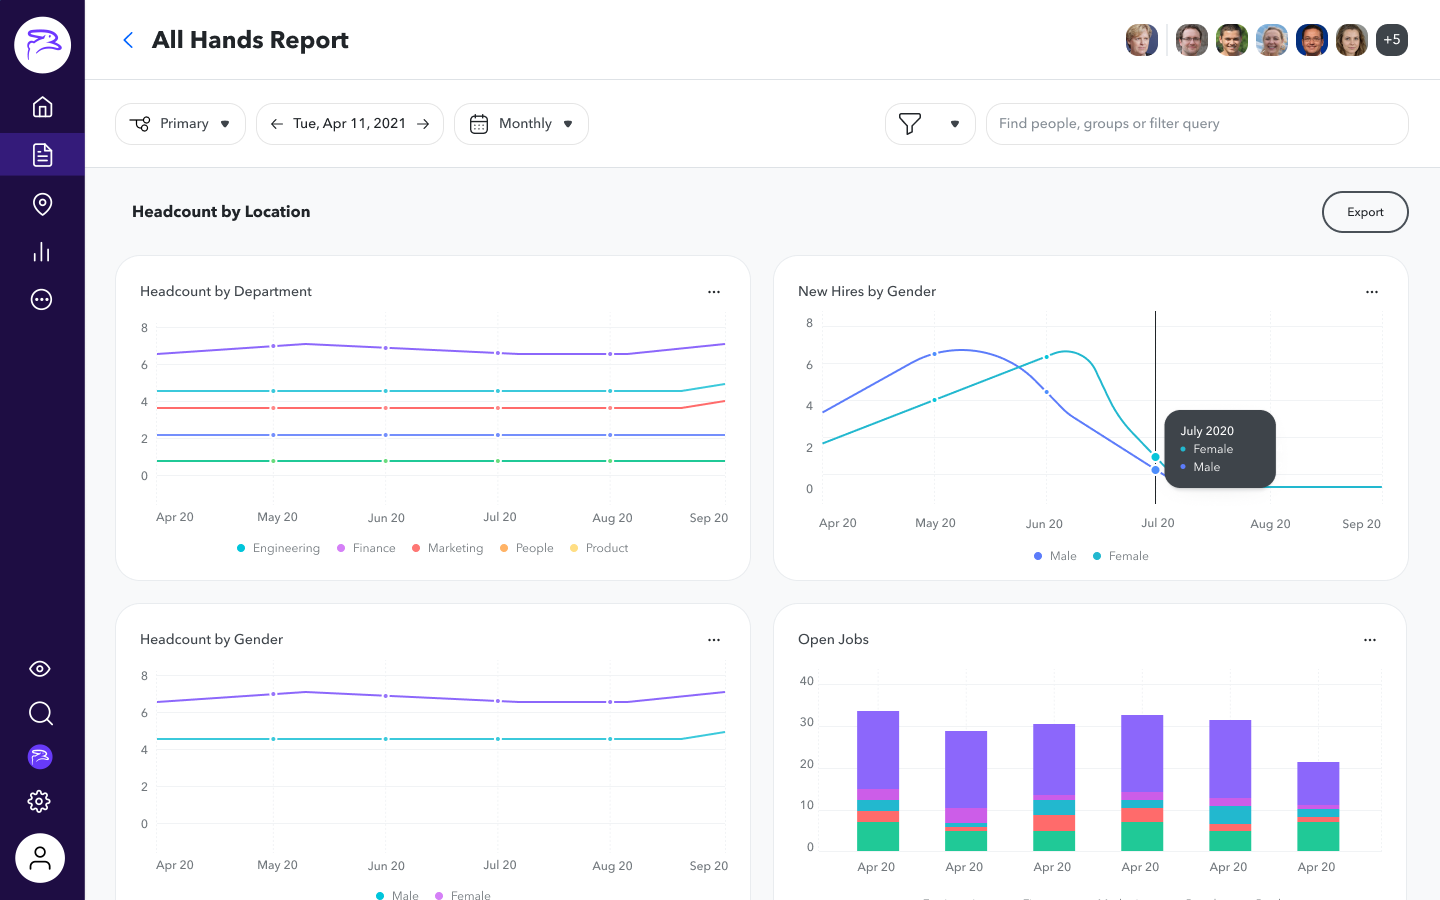 Flexible reporting: Slice and dice data the way you need, across any dimension, through custom configurations - or use our out-of-the-box options